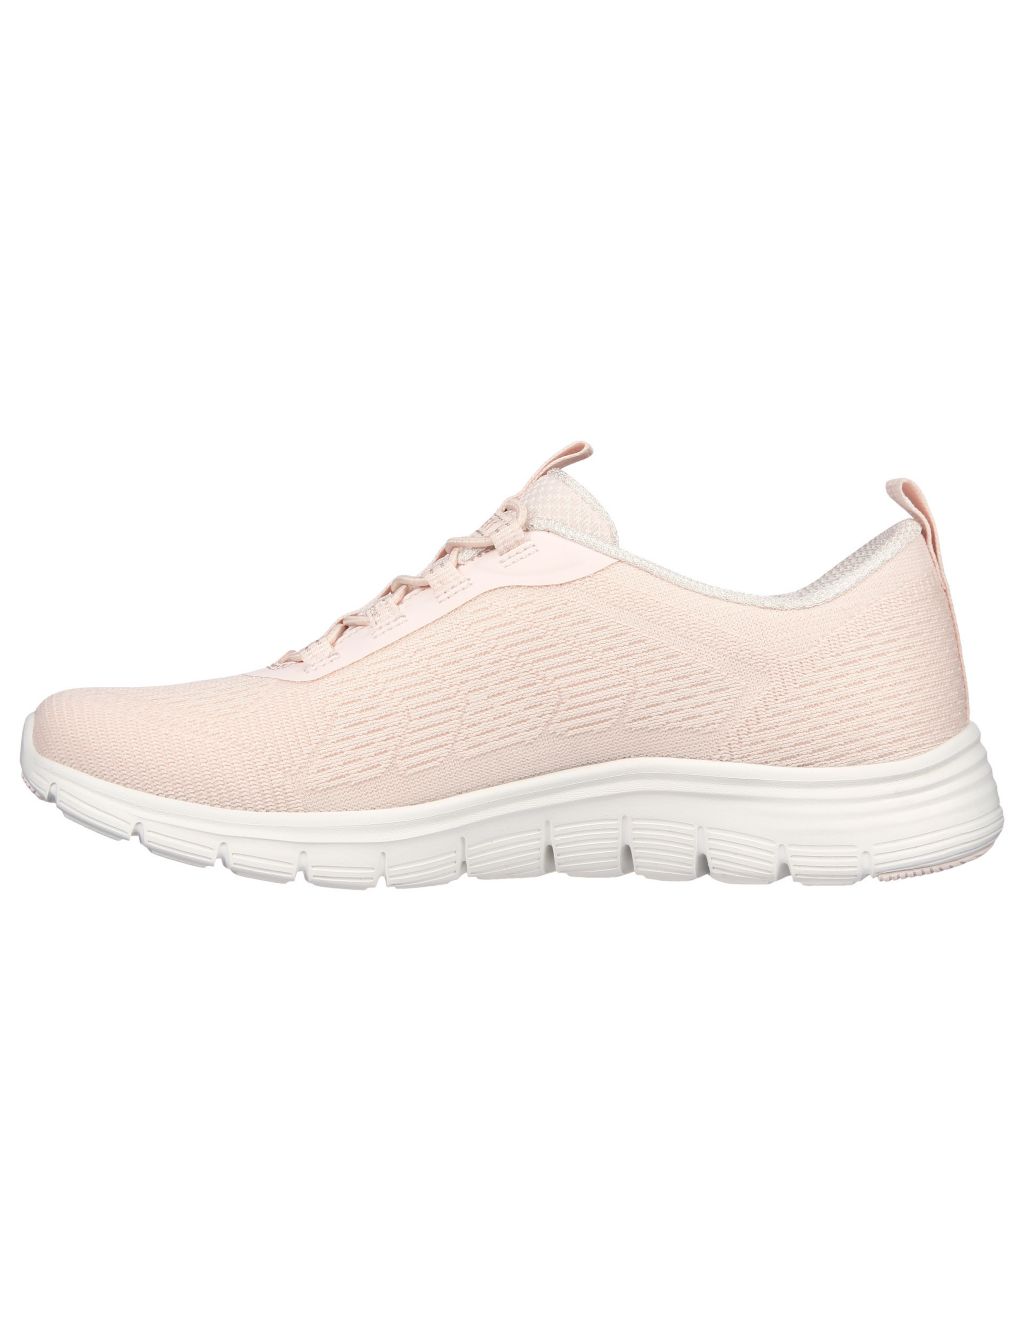 Arch Fit Vista Gleaming Knitted Trainers image 5